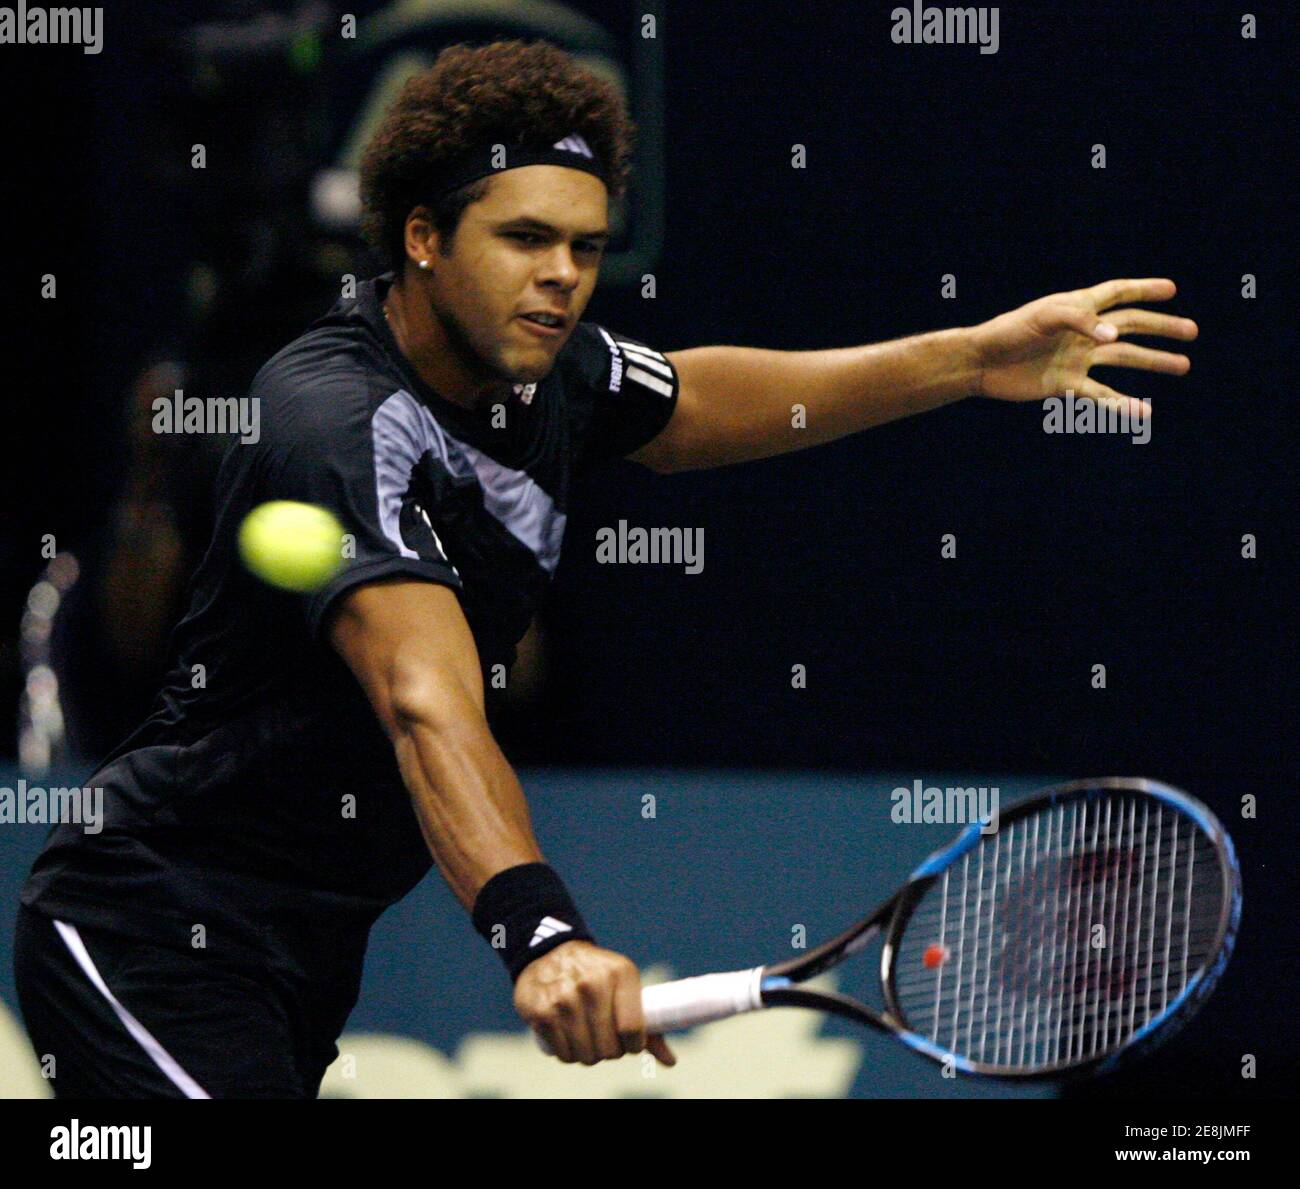 Jo-Wilfried Tsonga of France returns a shot to Ernests Gulbis of Latvia during their second round match at Thailand Open tennis tournament in Bangkok October 1, 2009. REUTERS/Chaiwat Subprasom (THAILAND SPORT TENNIS) Stock Photo